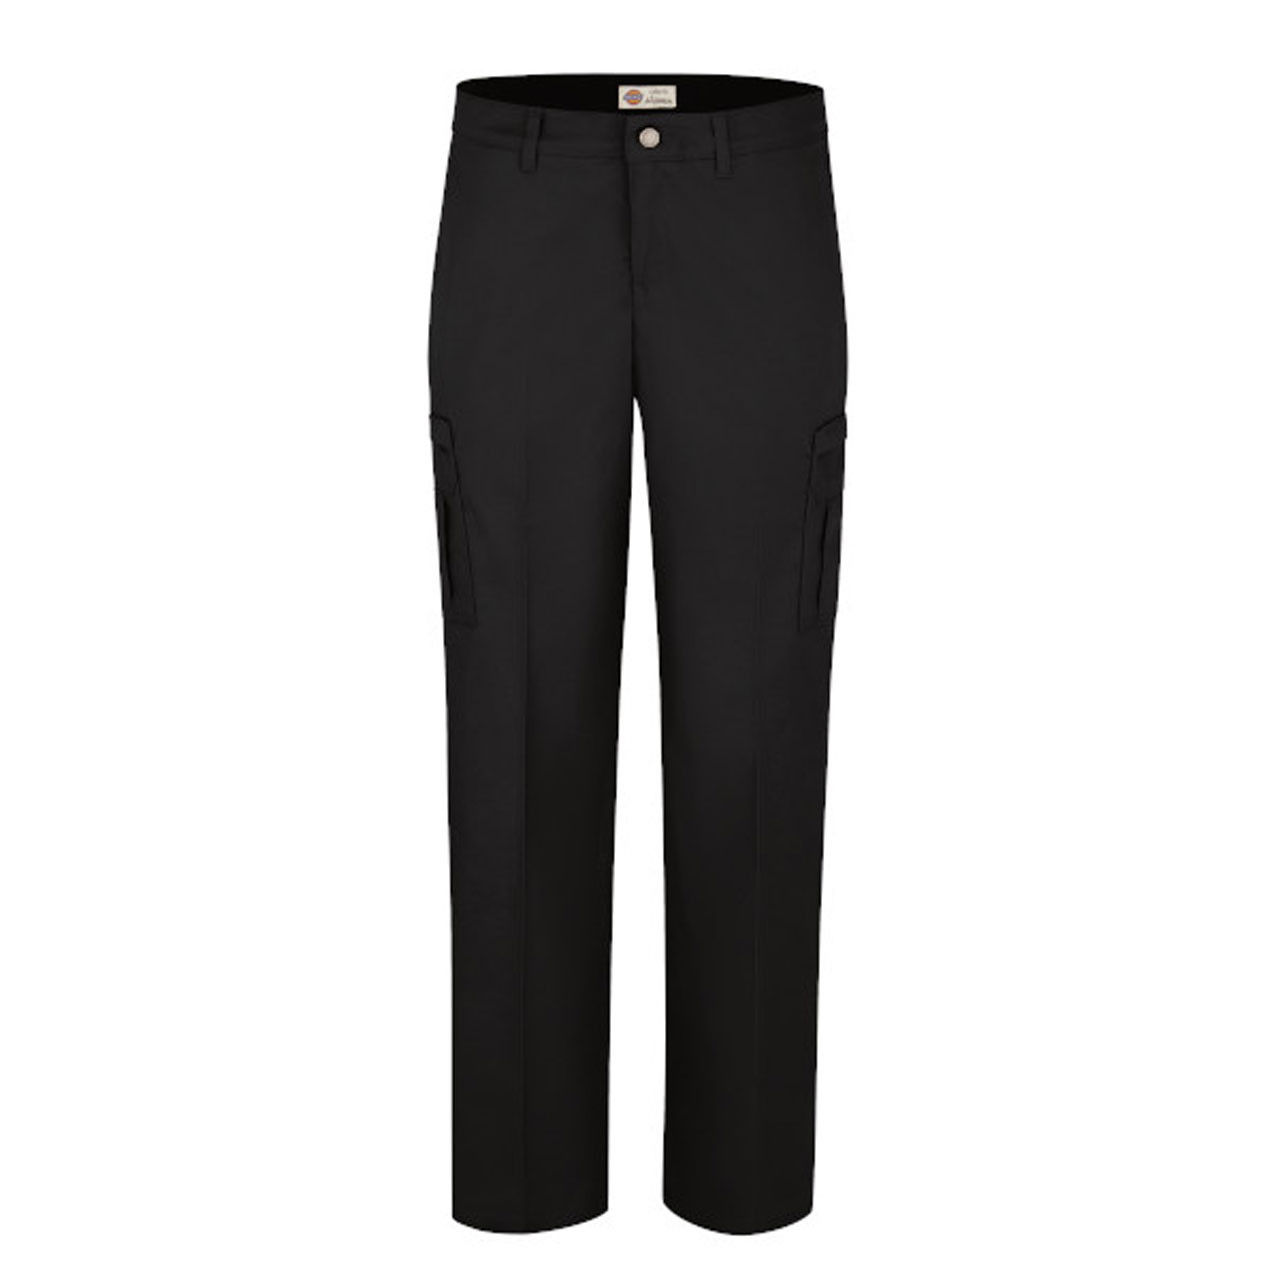 Is the Dickies size chart women's pants for Premium Relaxed Straight Cargo wrinkle-resistant?